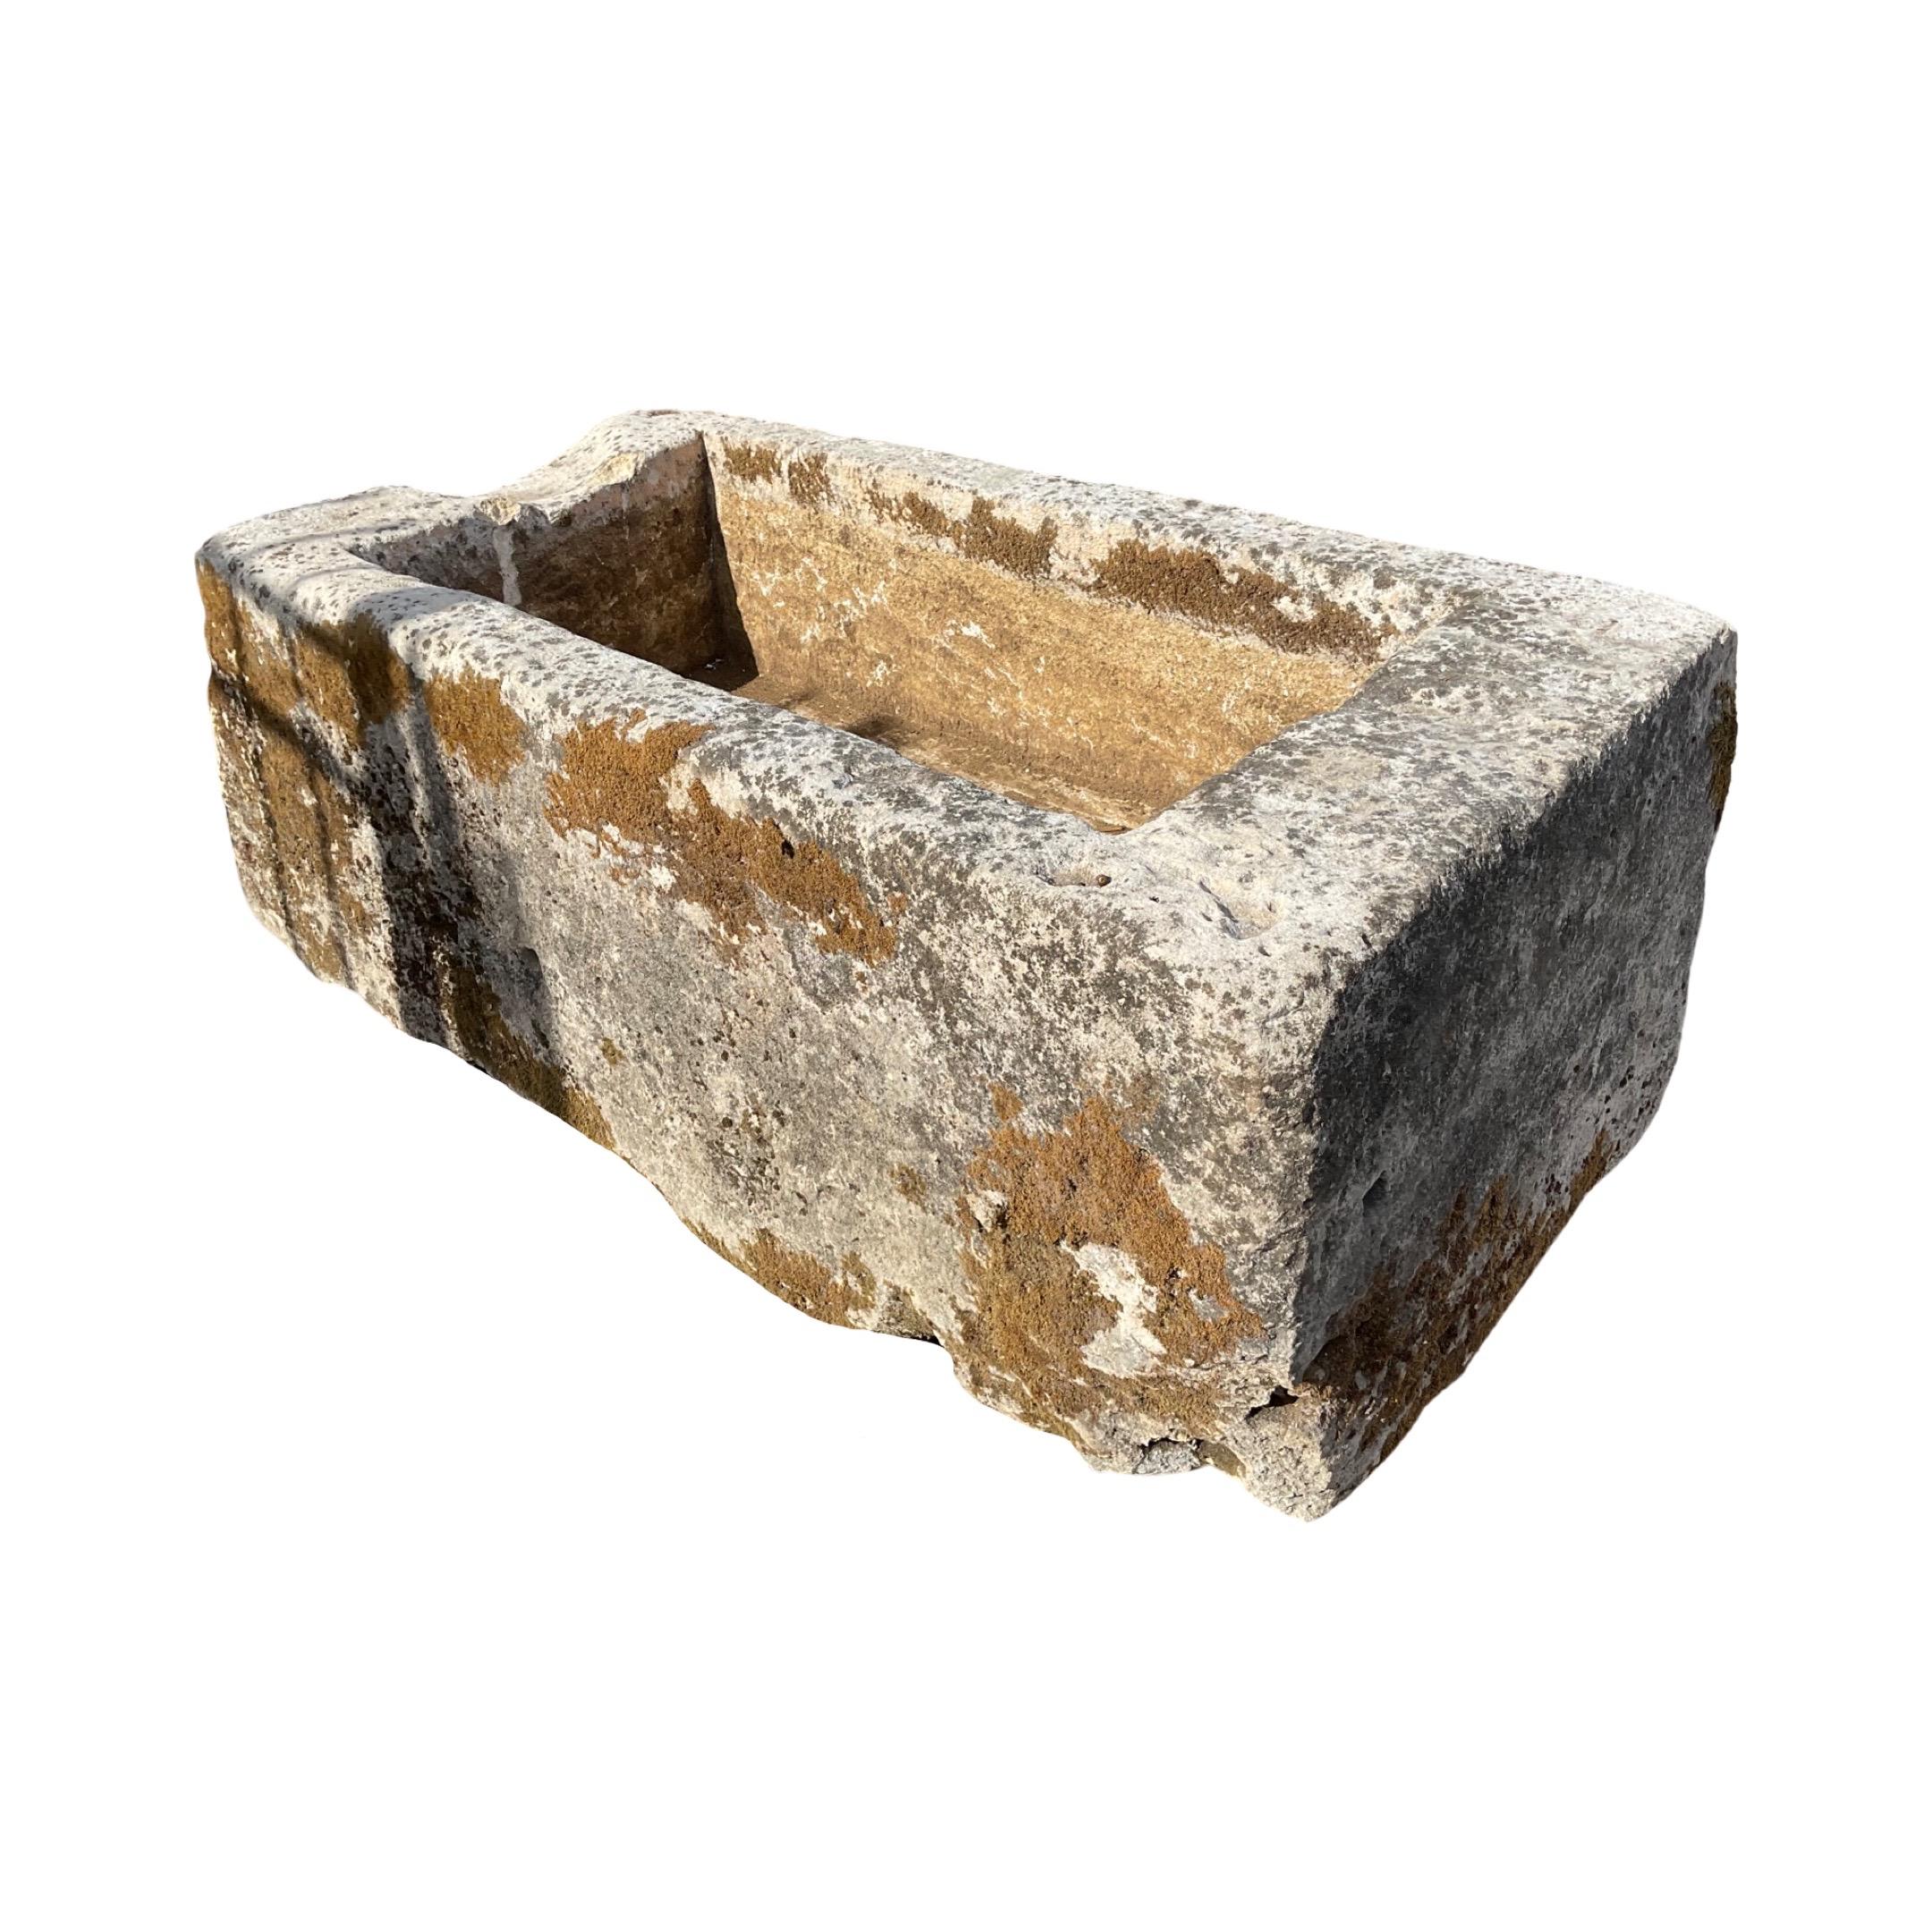 This 17th-century French limestone trough offers an elegant rectangular shape for a unique and beautiful piece of history. Perfect for use in gardens or other outdoor areas, this stone trough provides a durable and timeless accent.